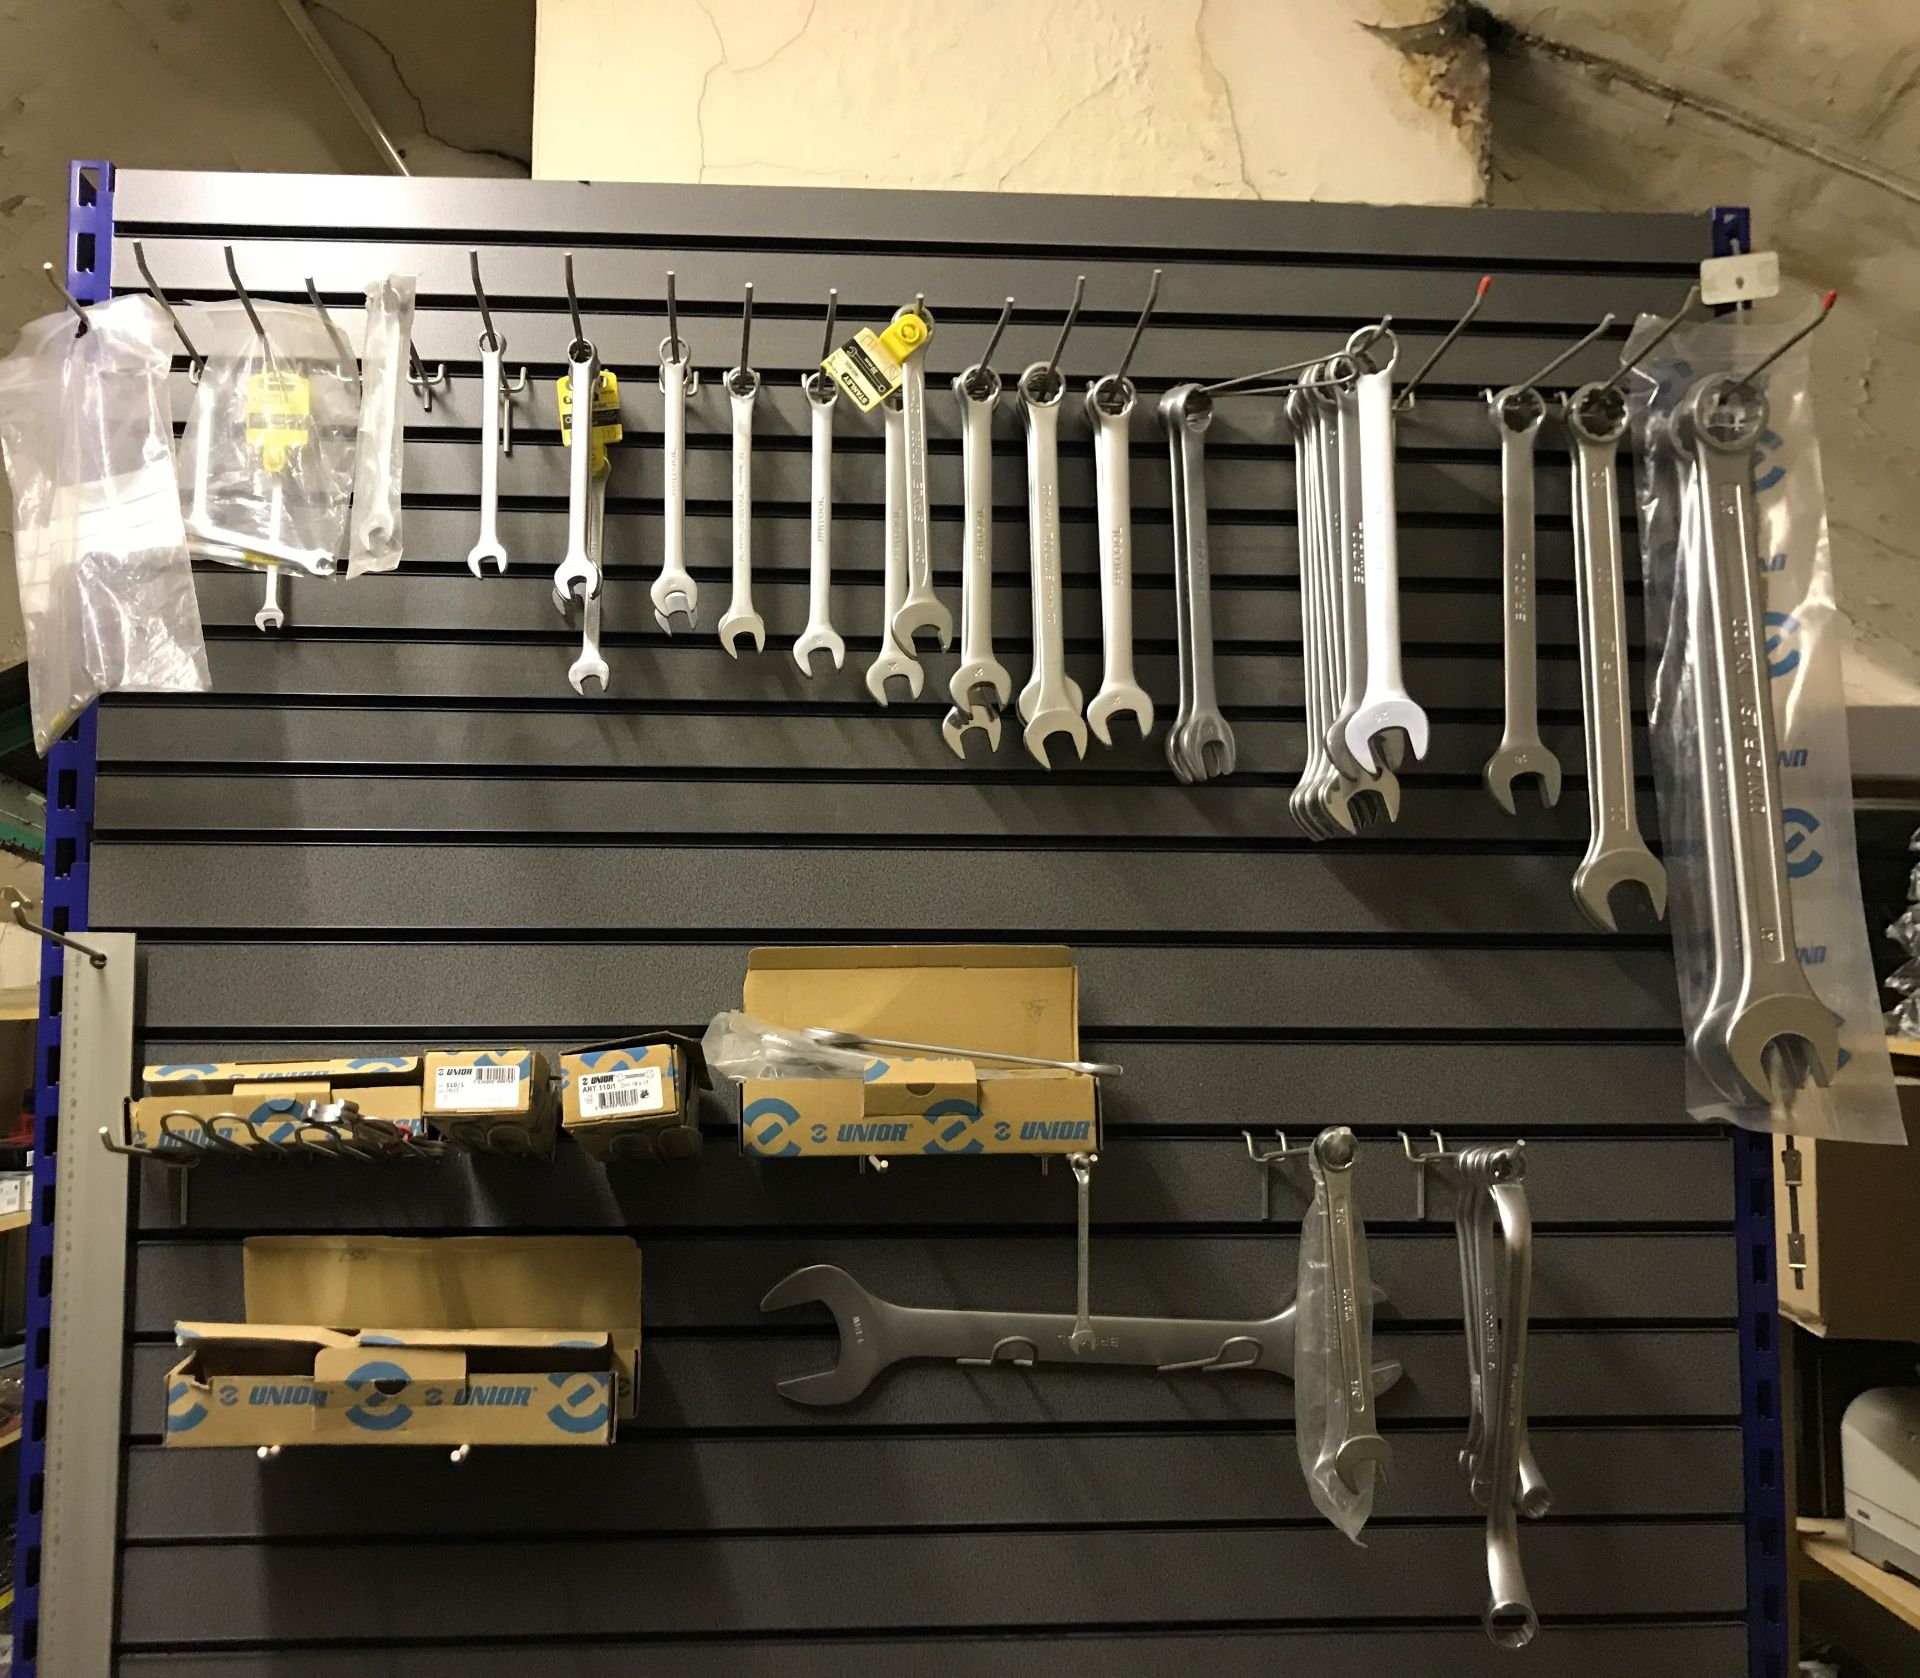 Quantity of Britool & Stanley Spanners - Various Sizes